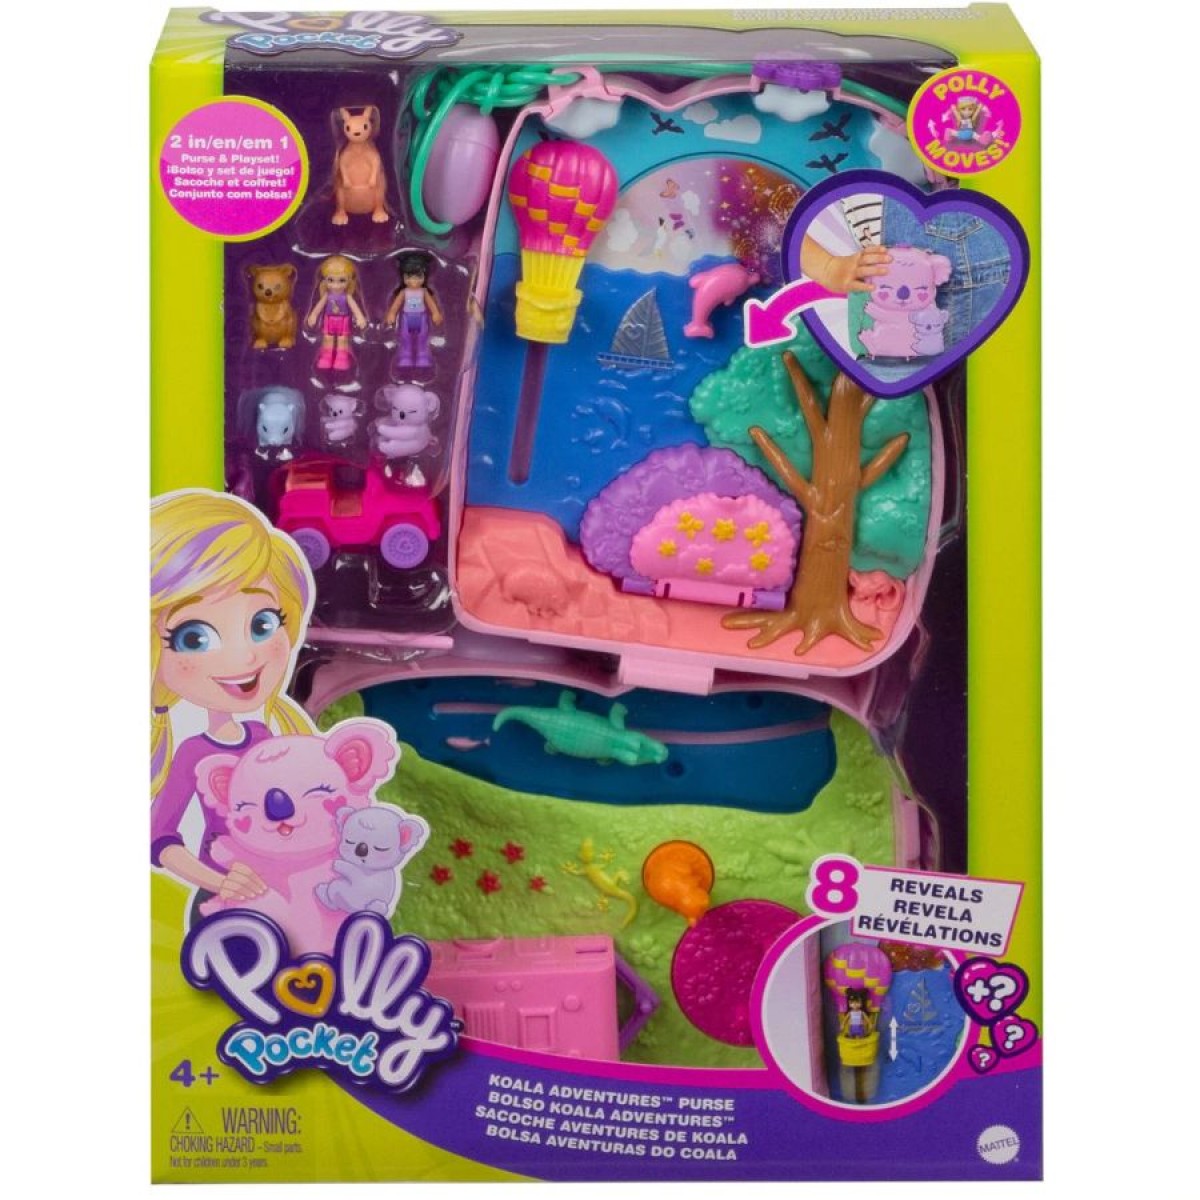 Polly Pocket Polly & Friends Pack Assortment